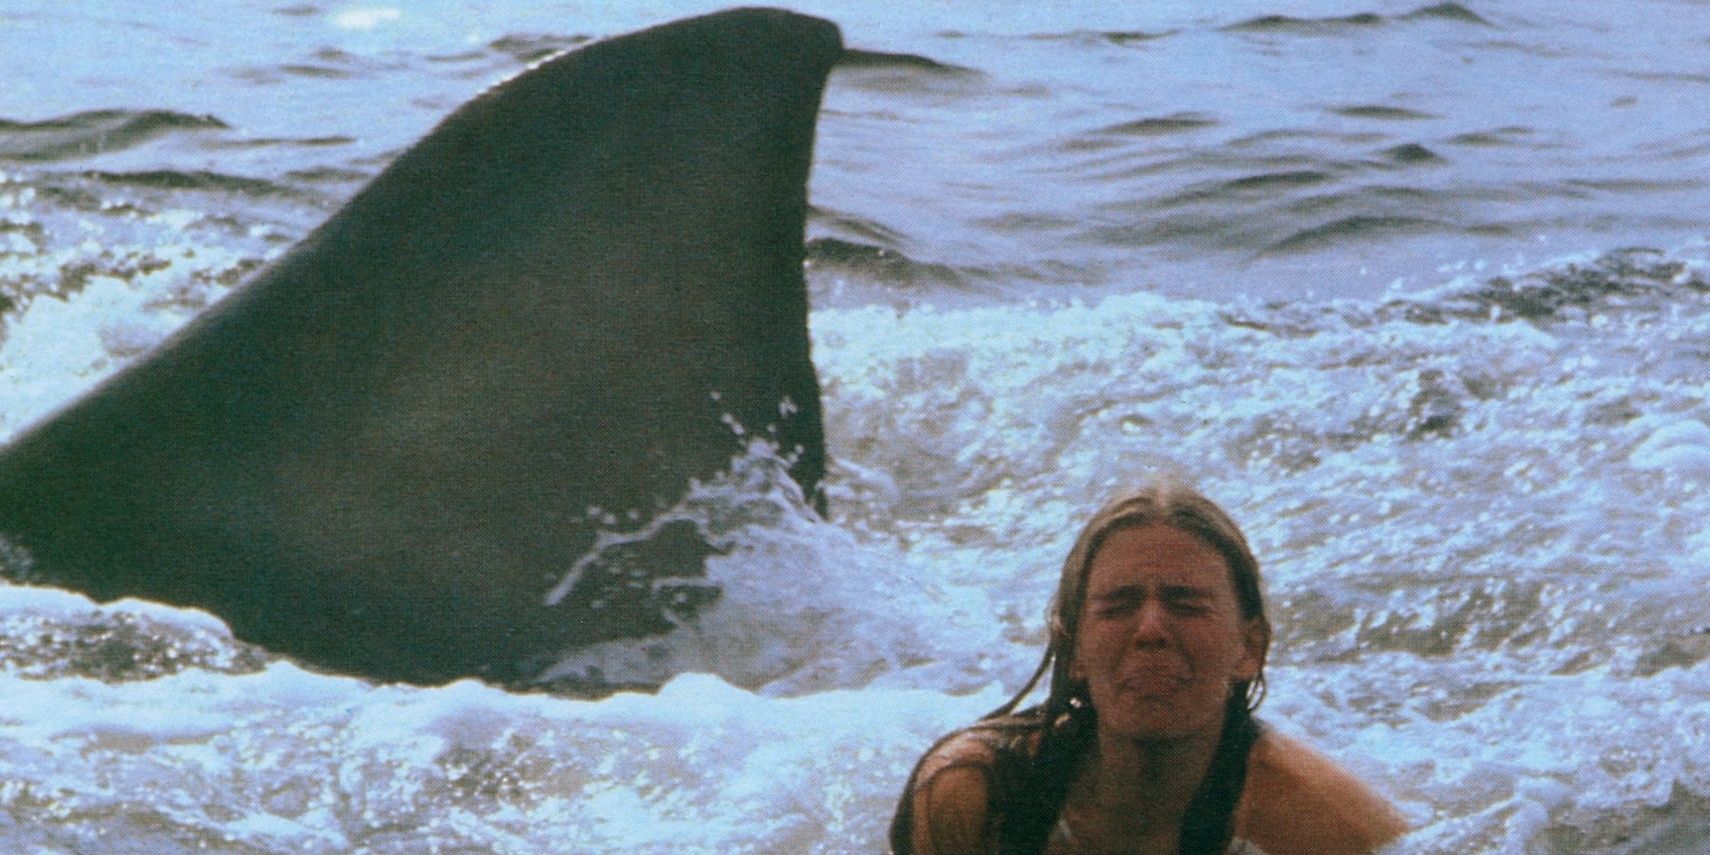 Jaws 2 Feature Image Cropped